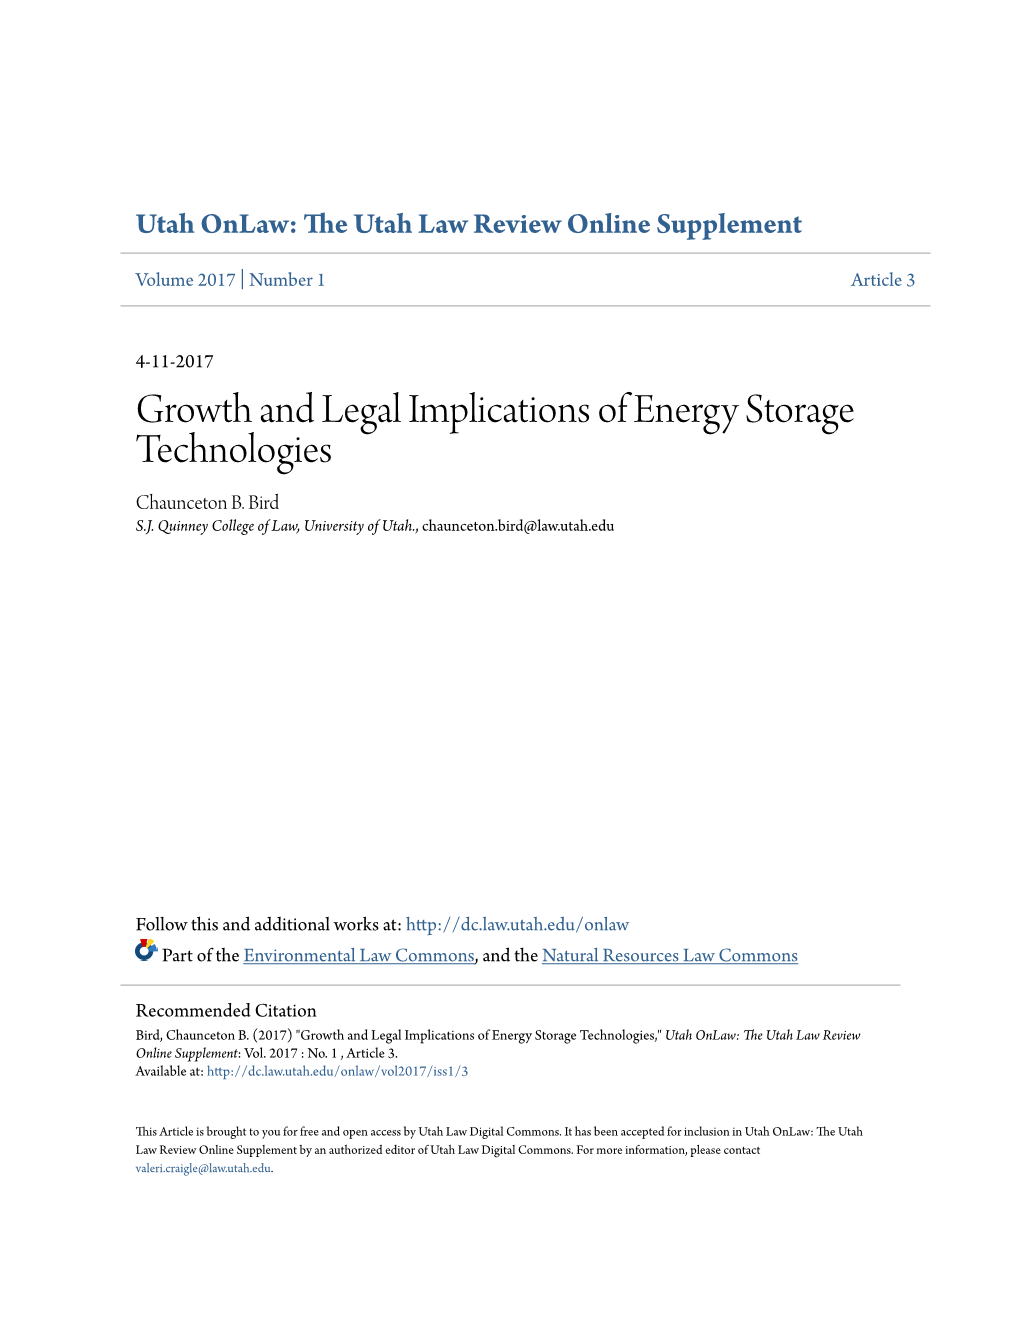 Growth and Legal Implications of Energy Storage Technologies Chaunceton B